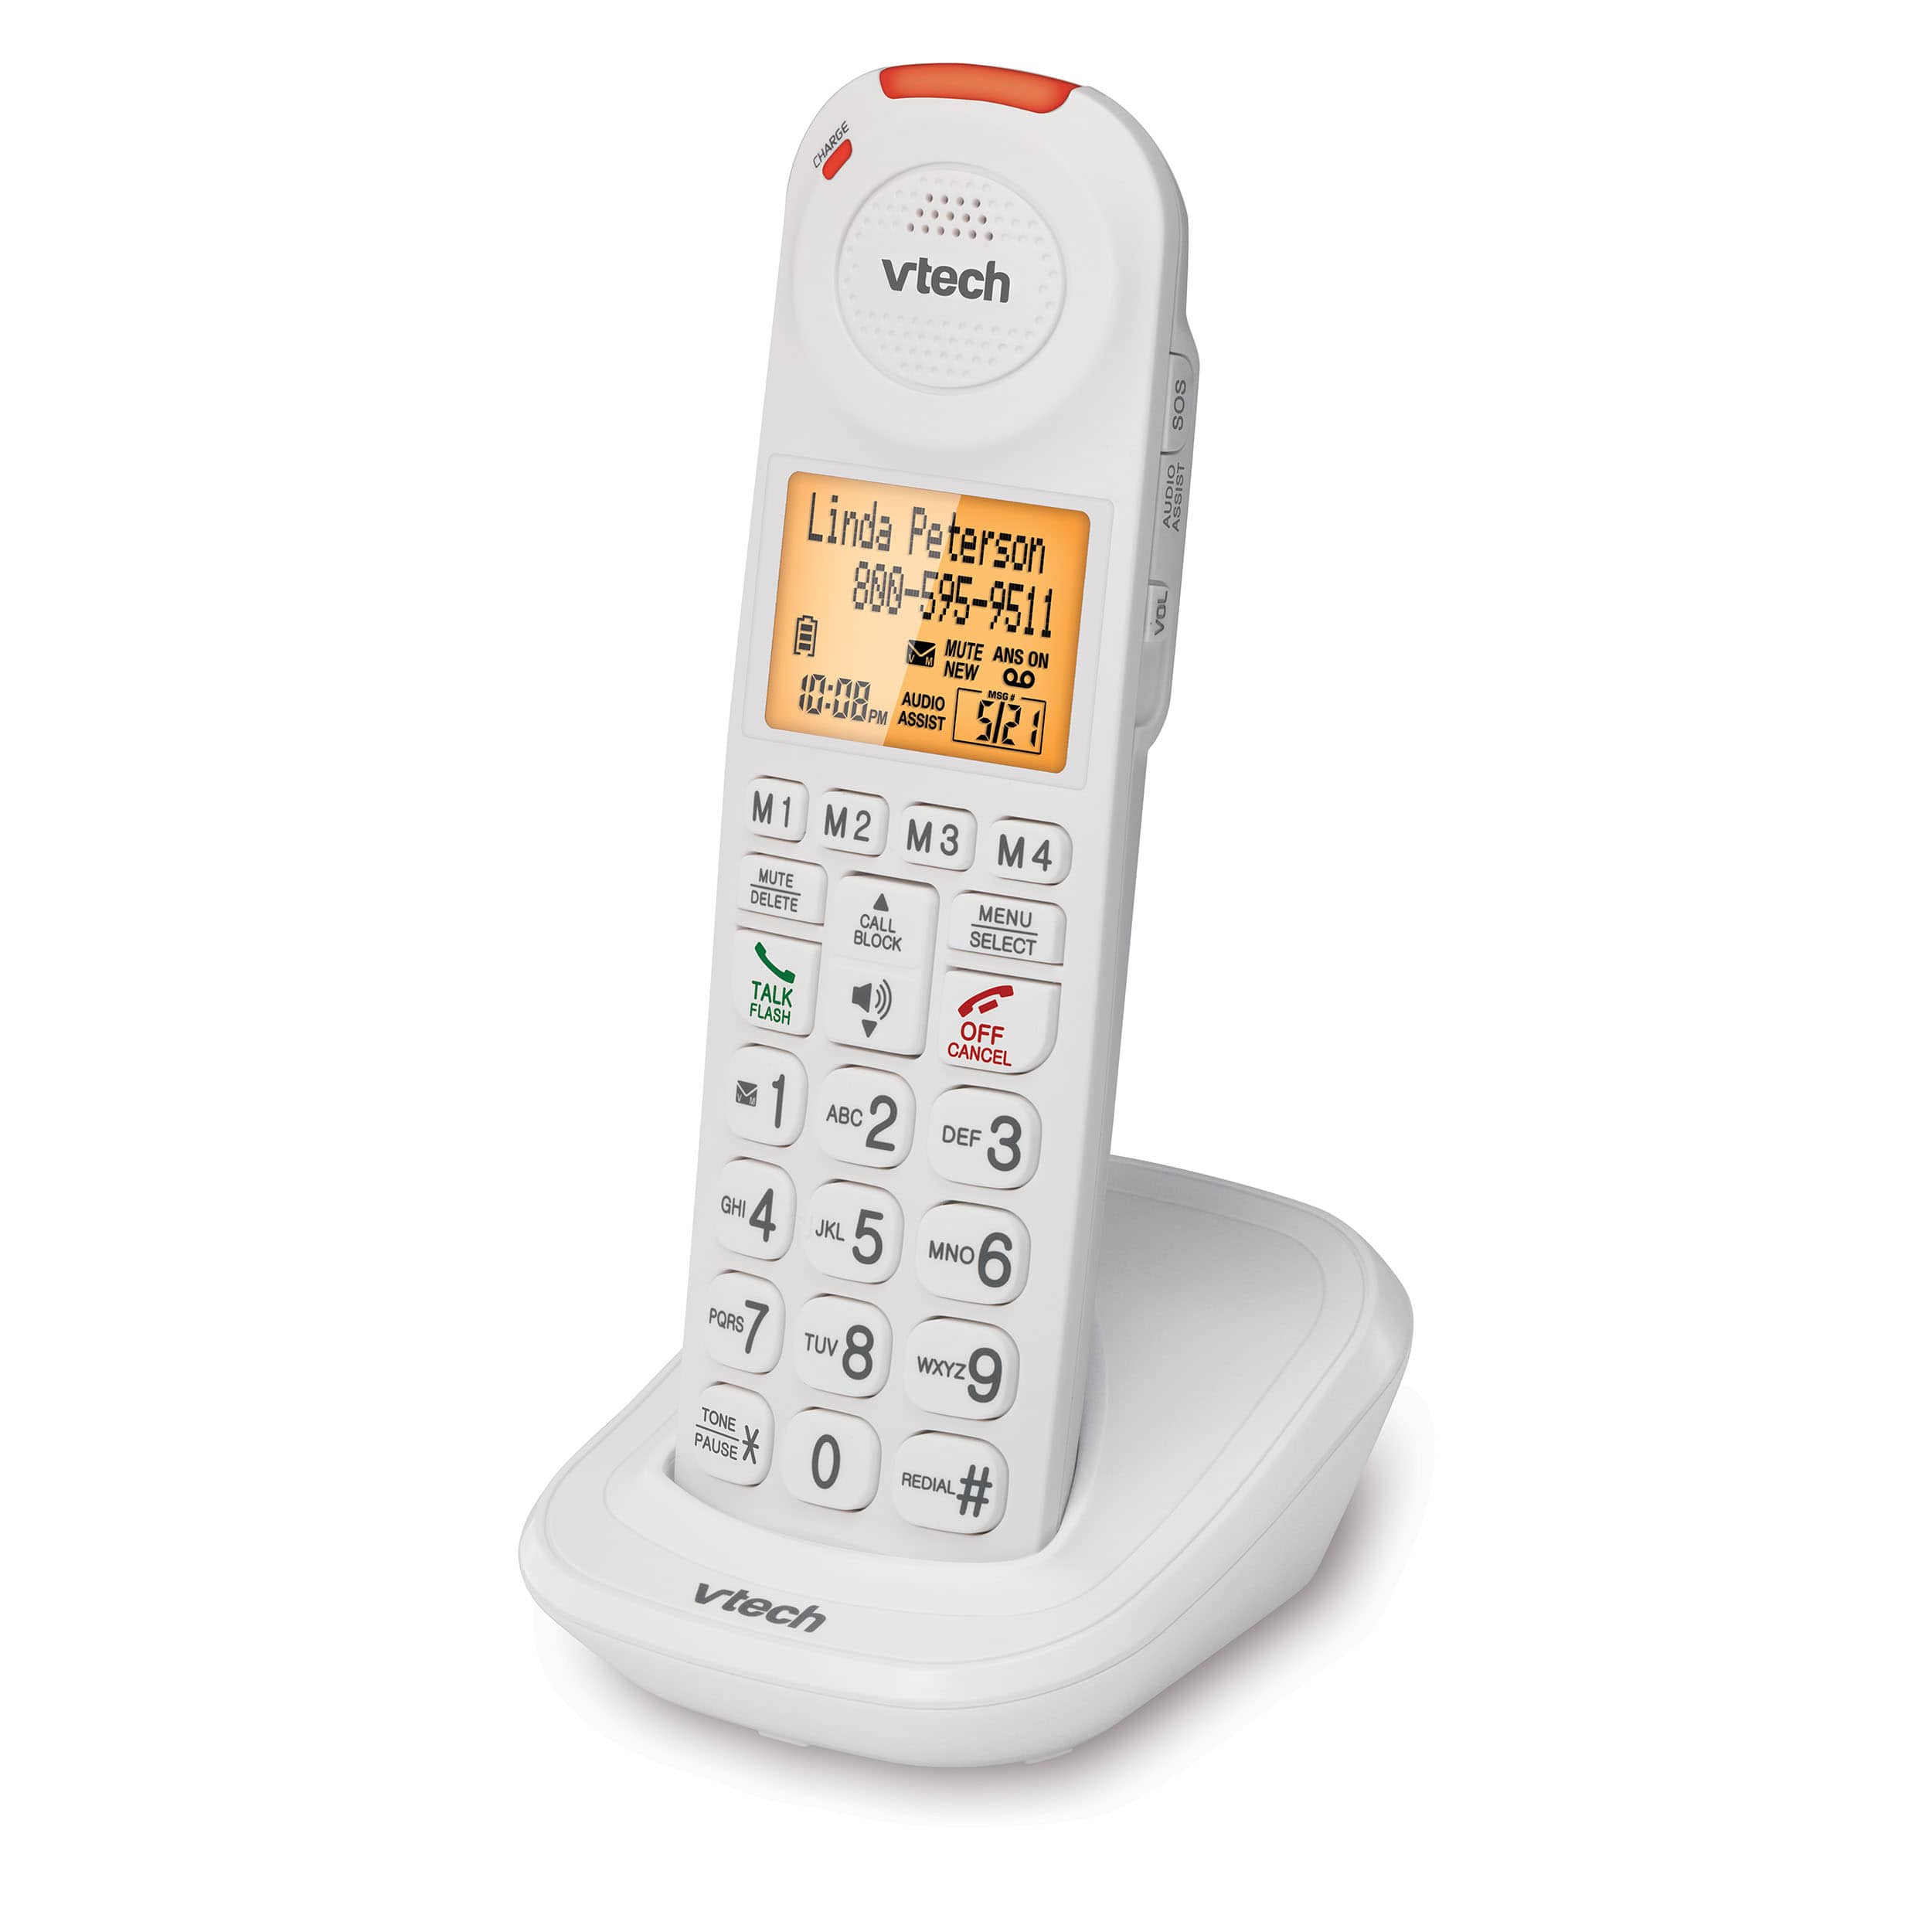 4 Handset Amplified Cordless Answering System with Big Buttons and Display - view 6